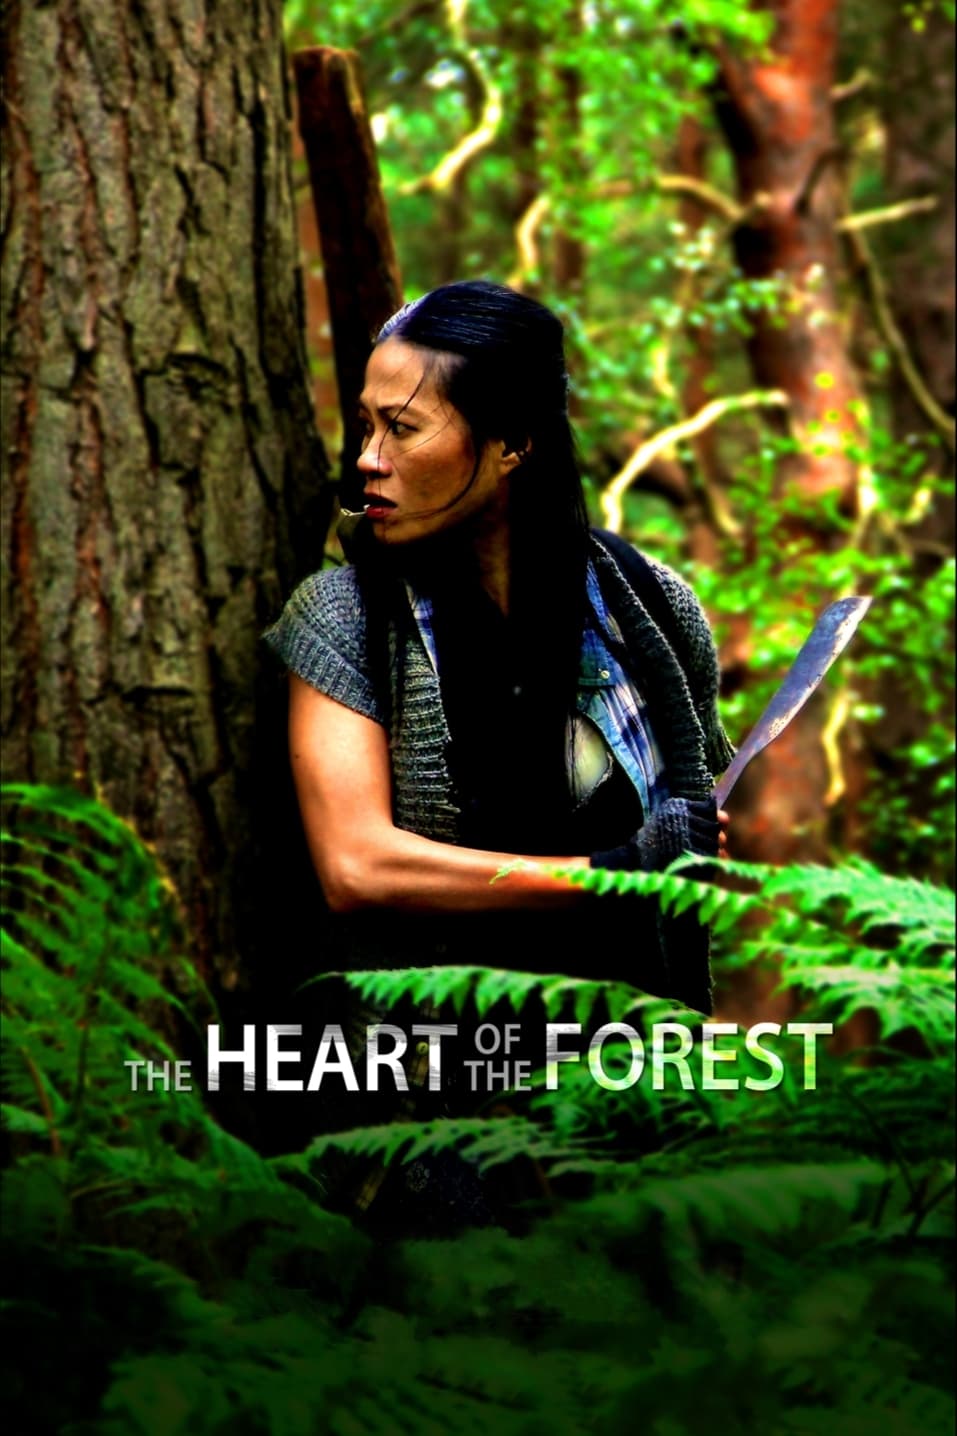 The Heart of the Forest film